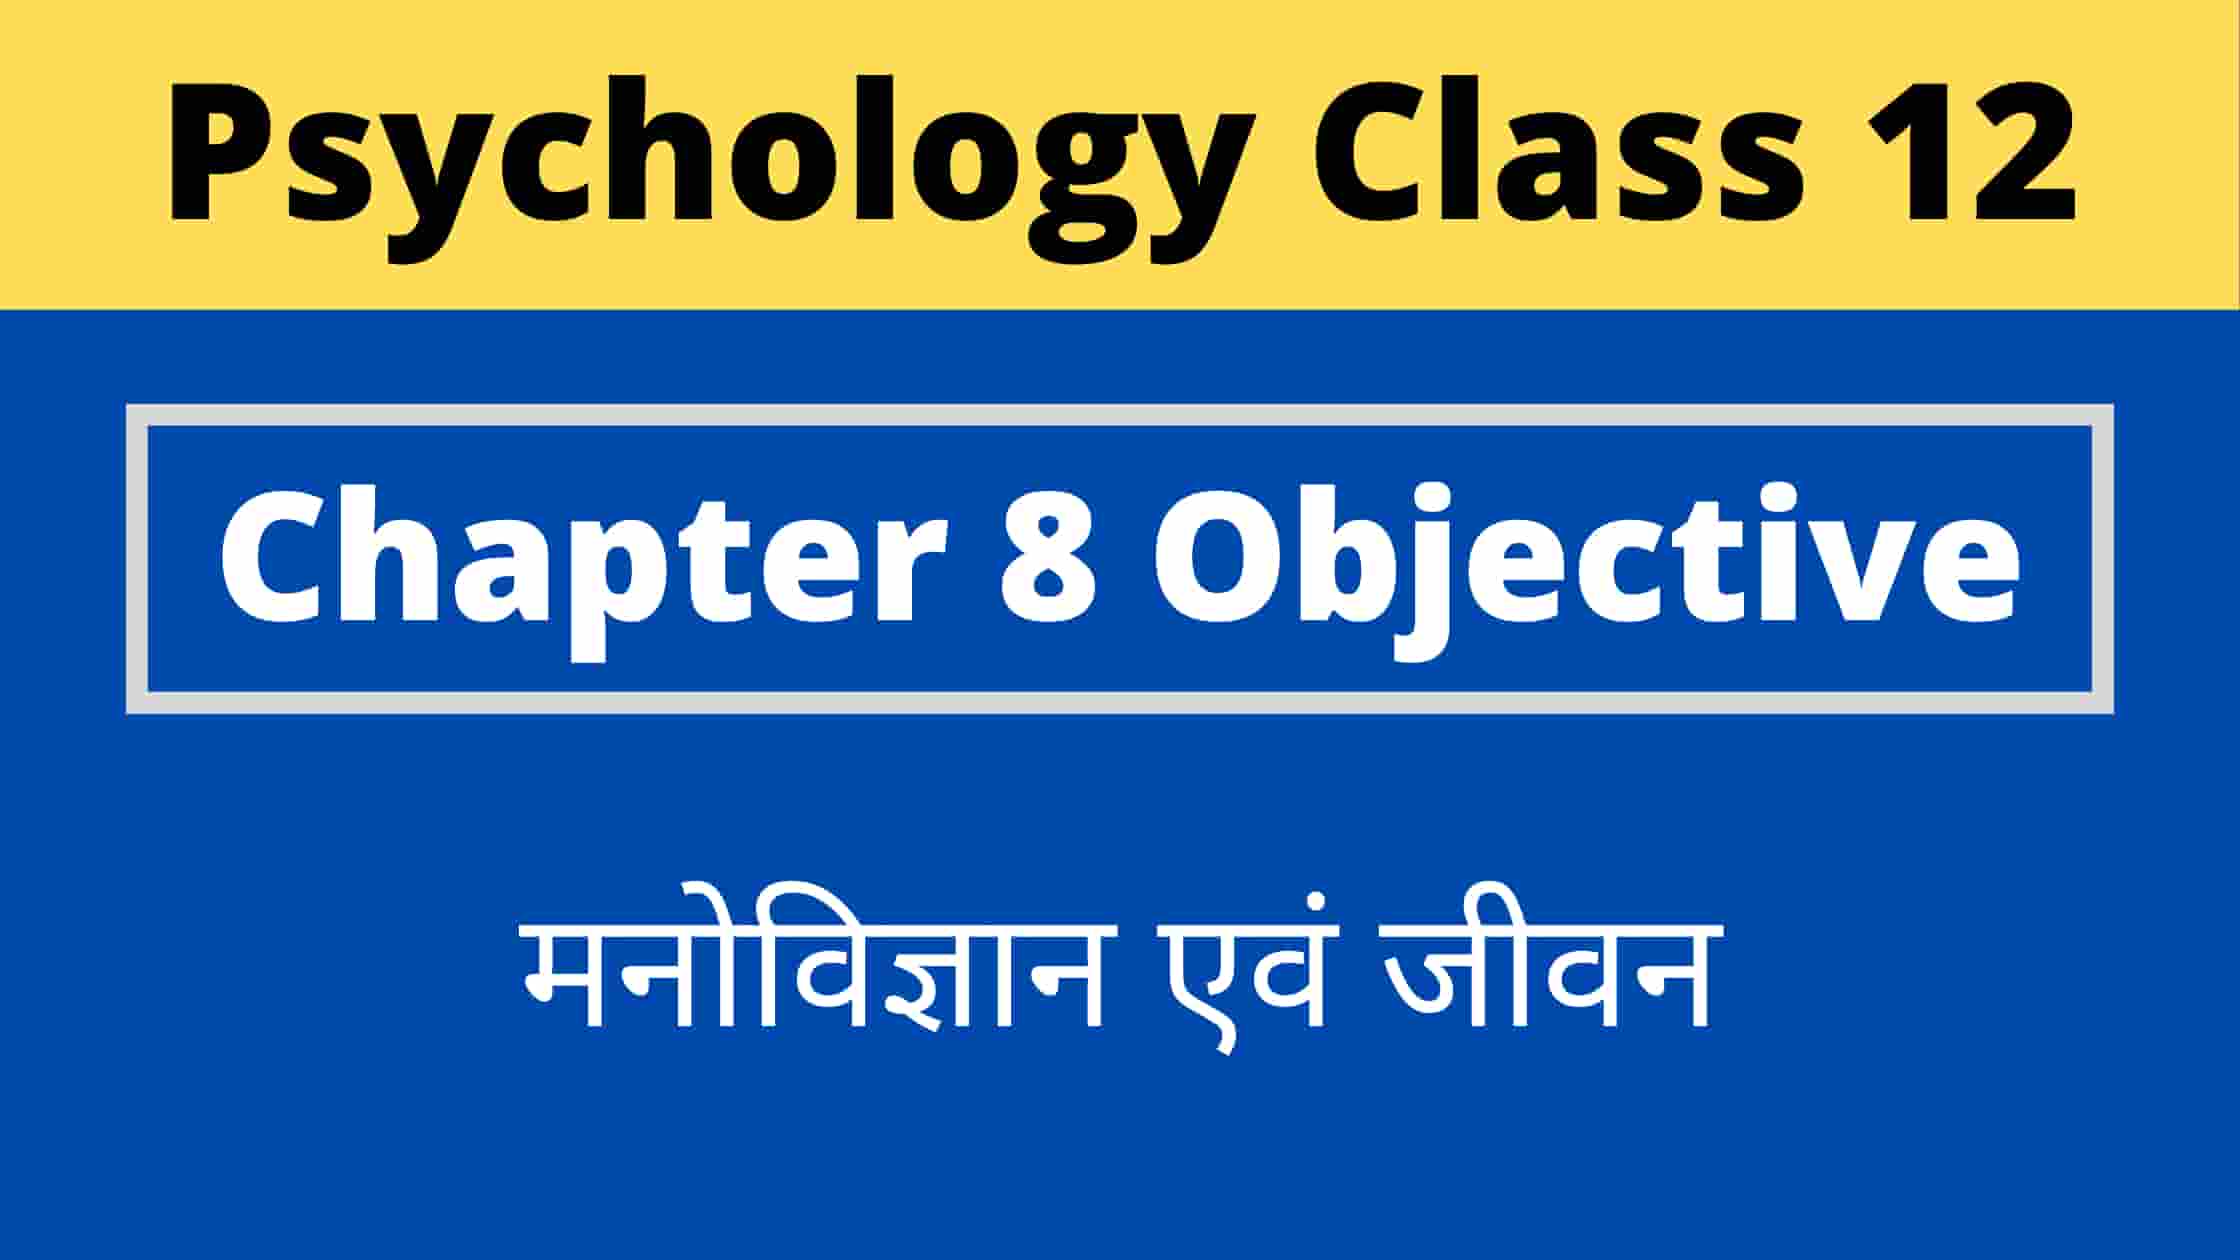 You are currently viewing Psychology Class 12 Chapter 8